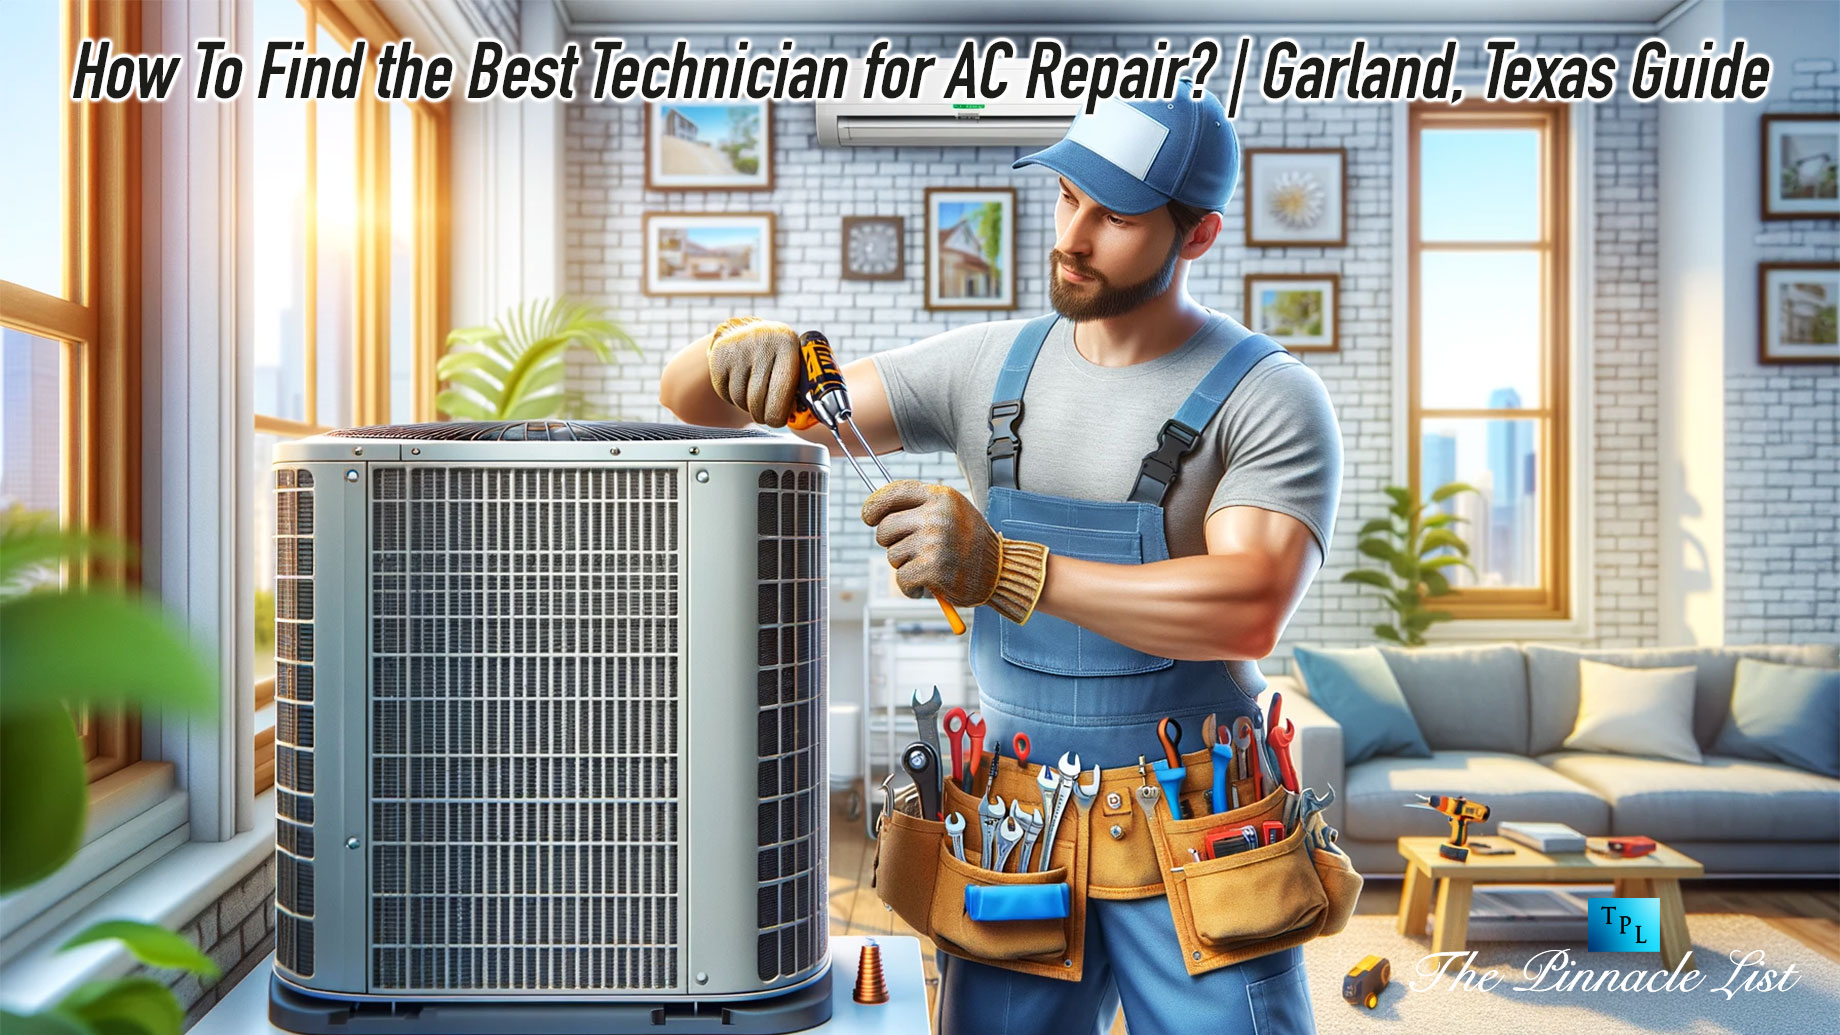 How To Find the Best Technician for AC Repair? - Garland, Texas Guide